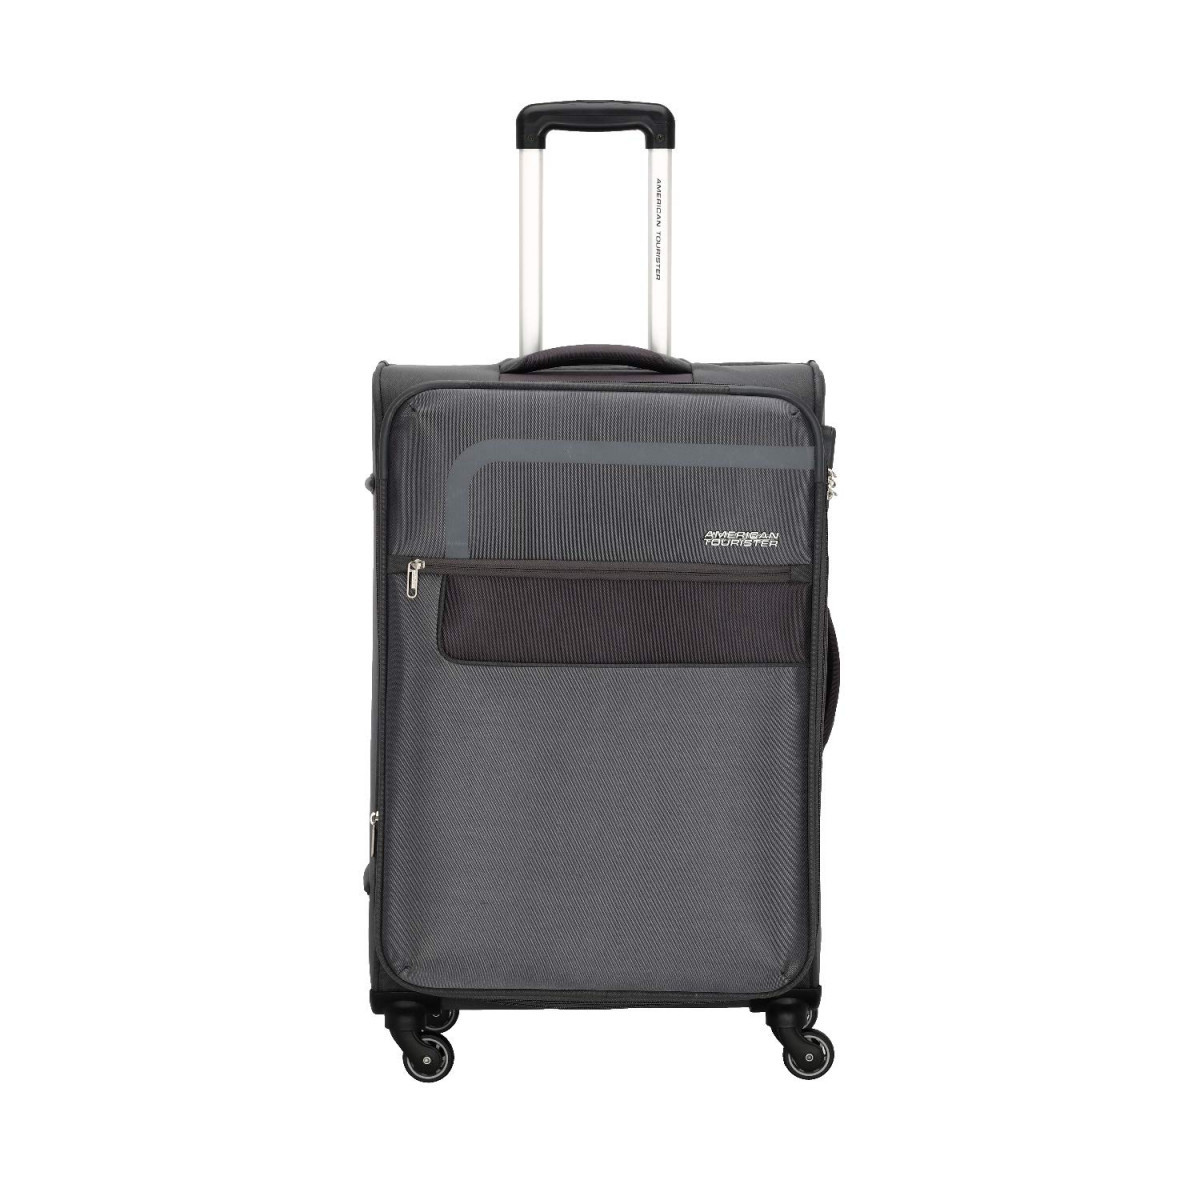 American Tourister Geneva 69 cms Medium Check-in Polyester Soft Sided 4 Spinner Wheels LuggageSuitcaseTrolley Bag Grey